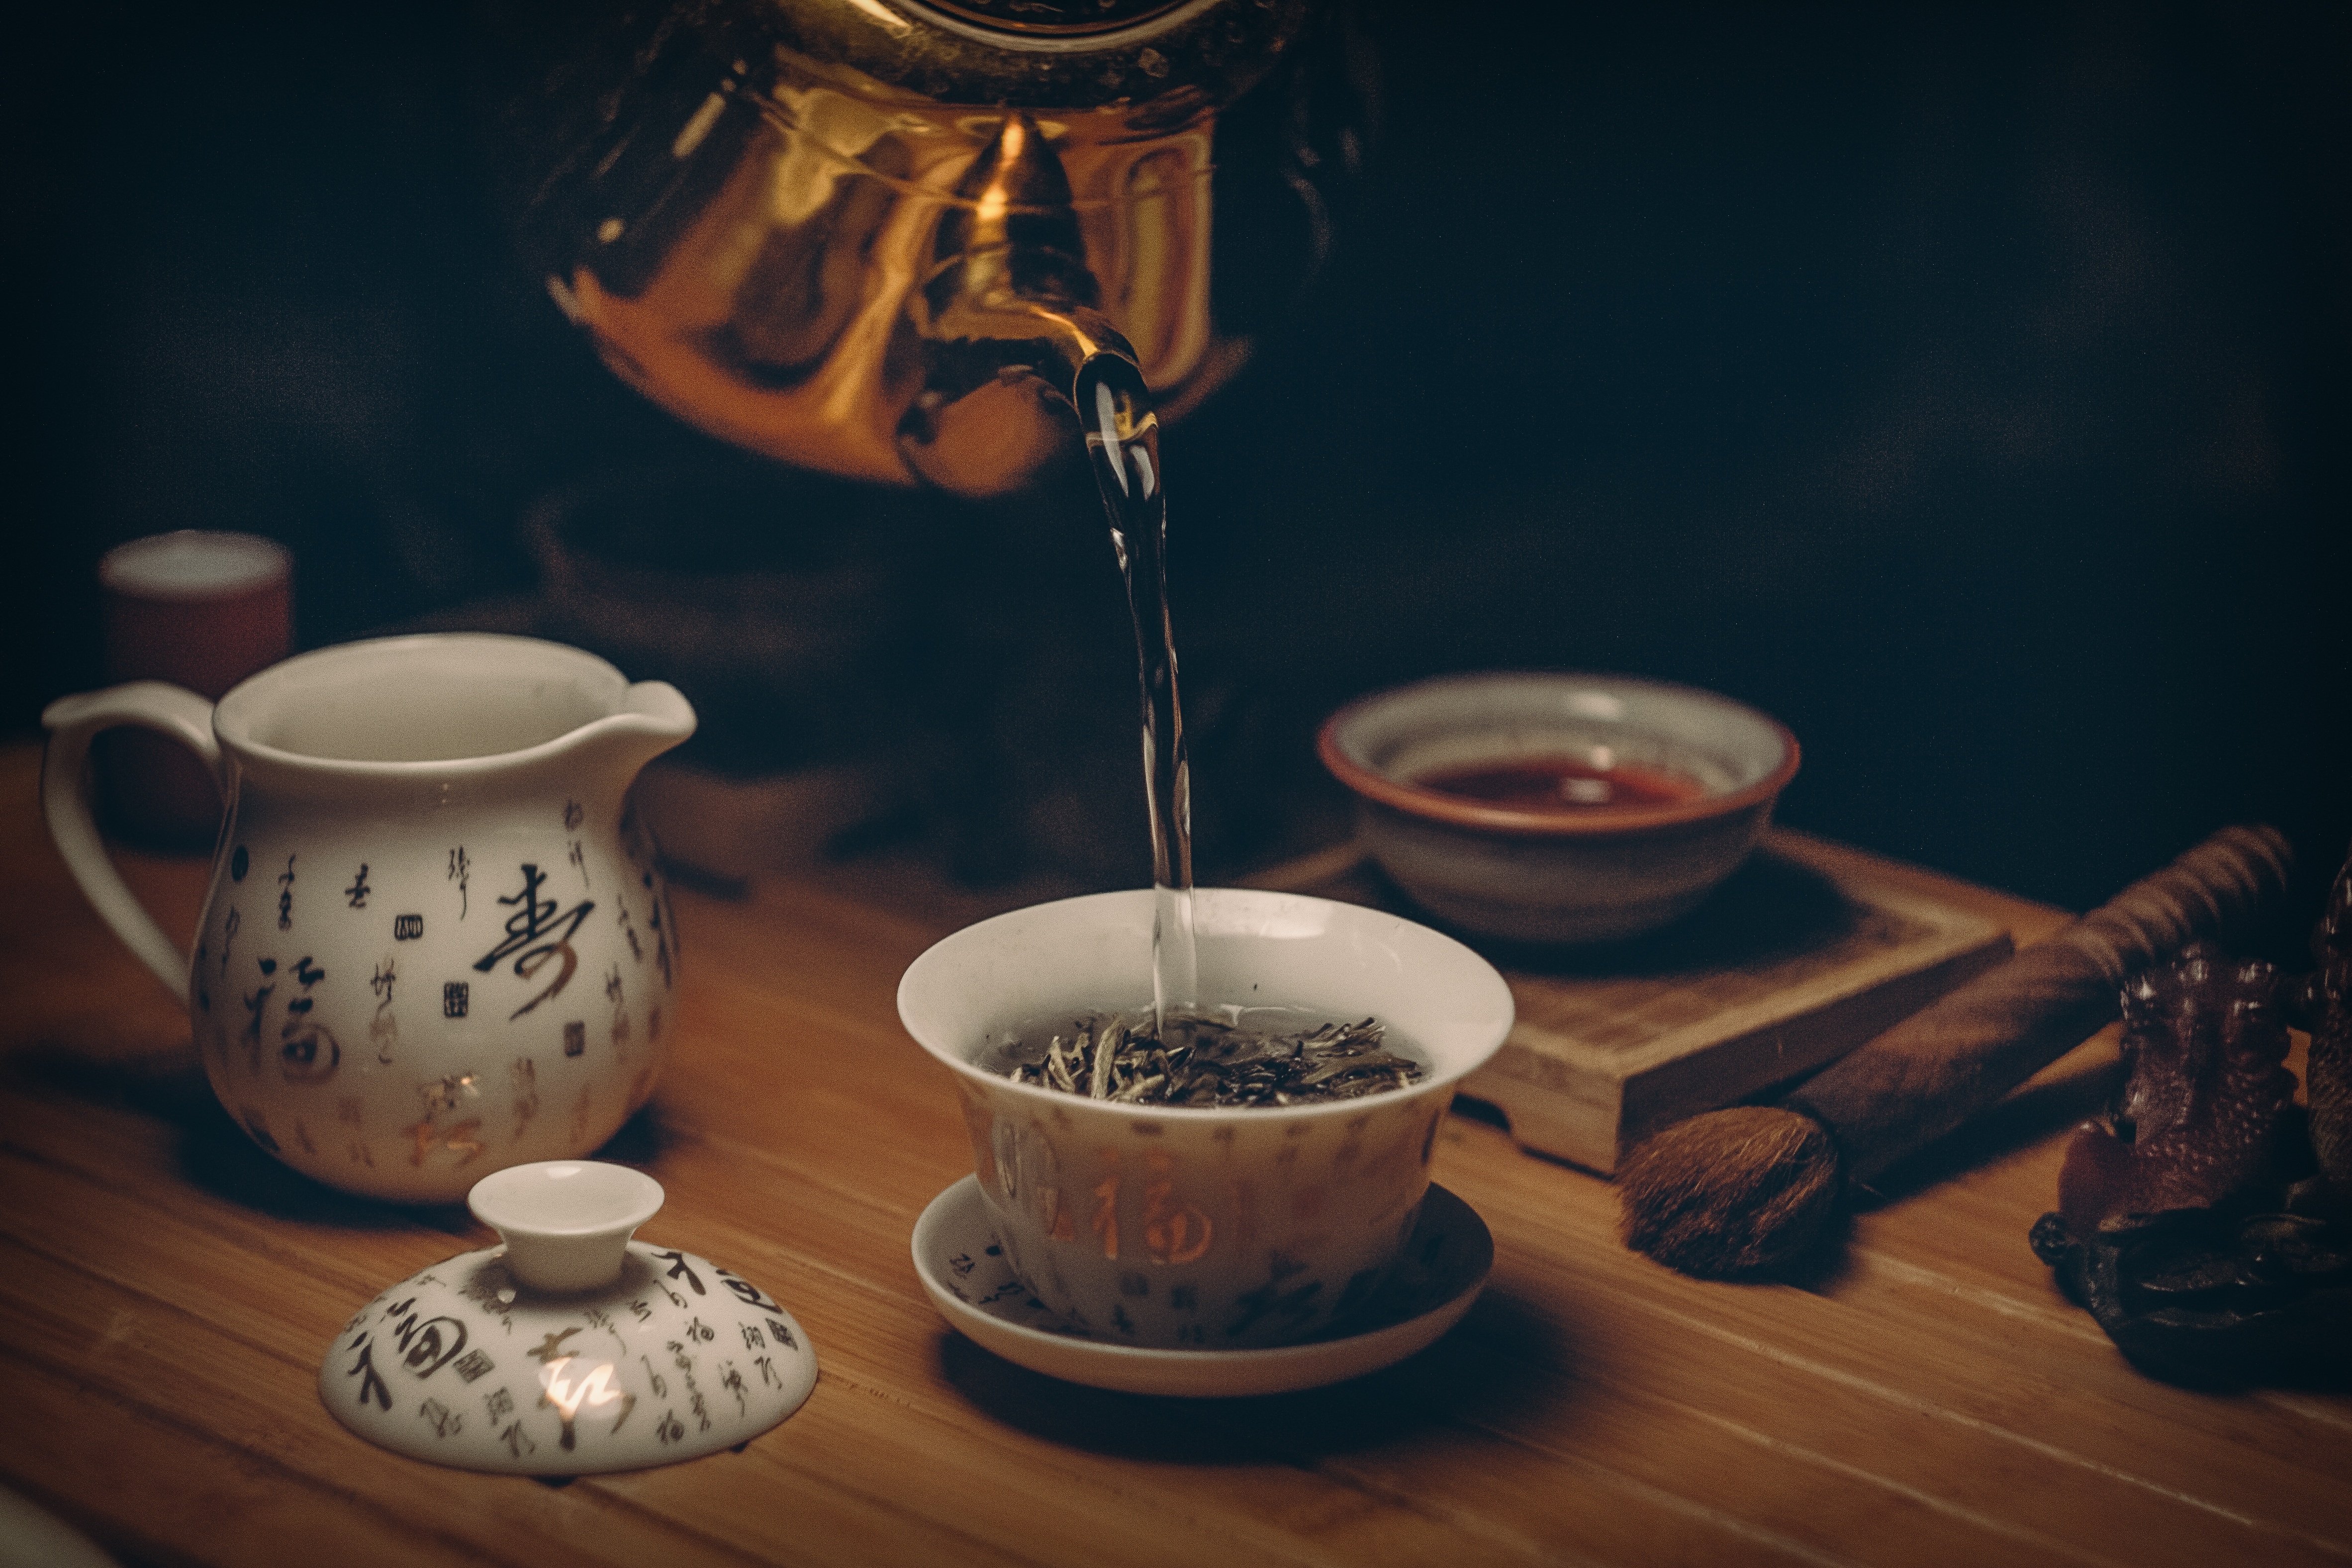 golden kettle pouring hot water into a white teacup atop a wooden table